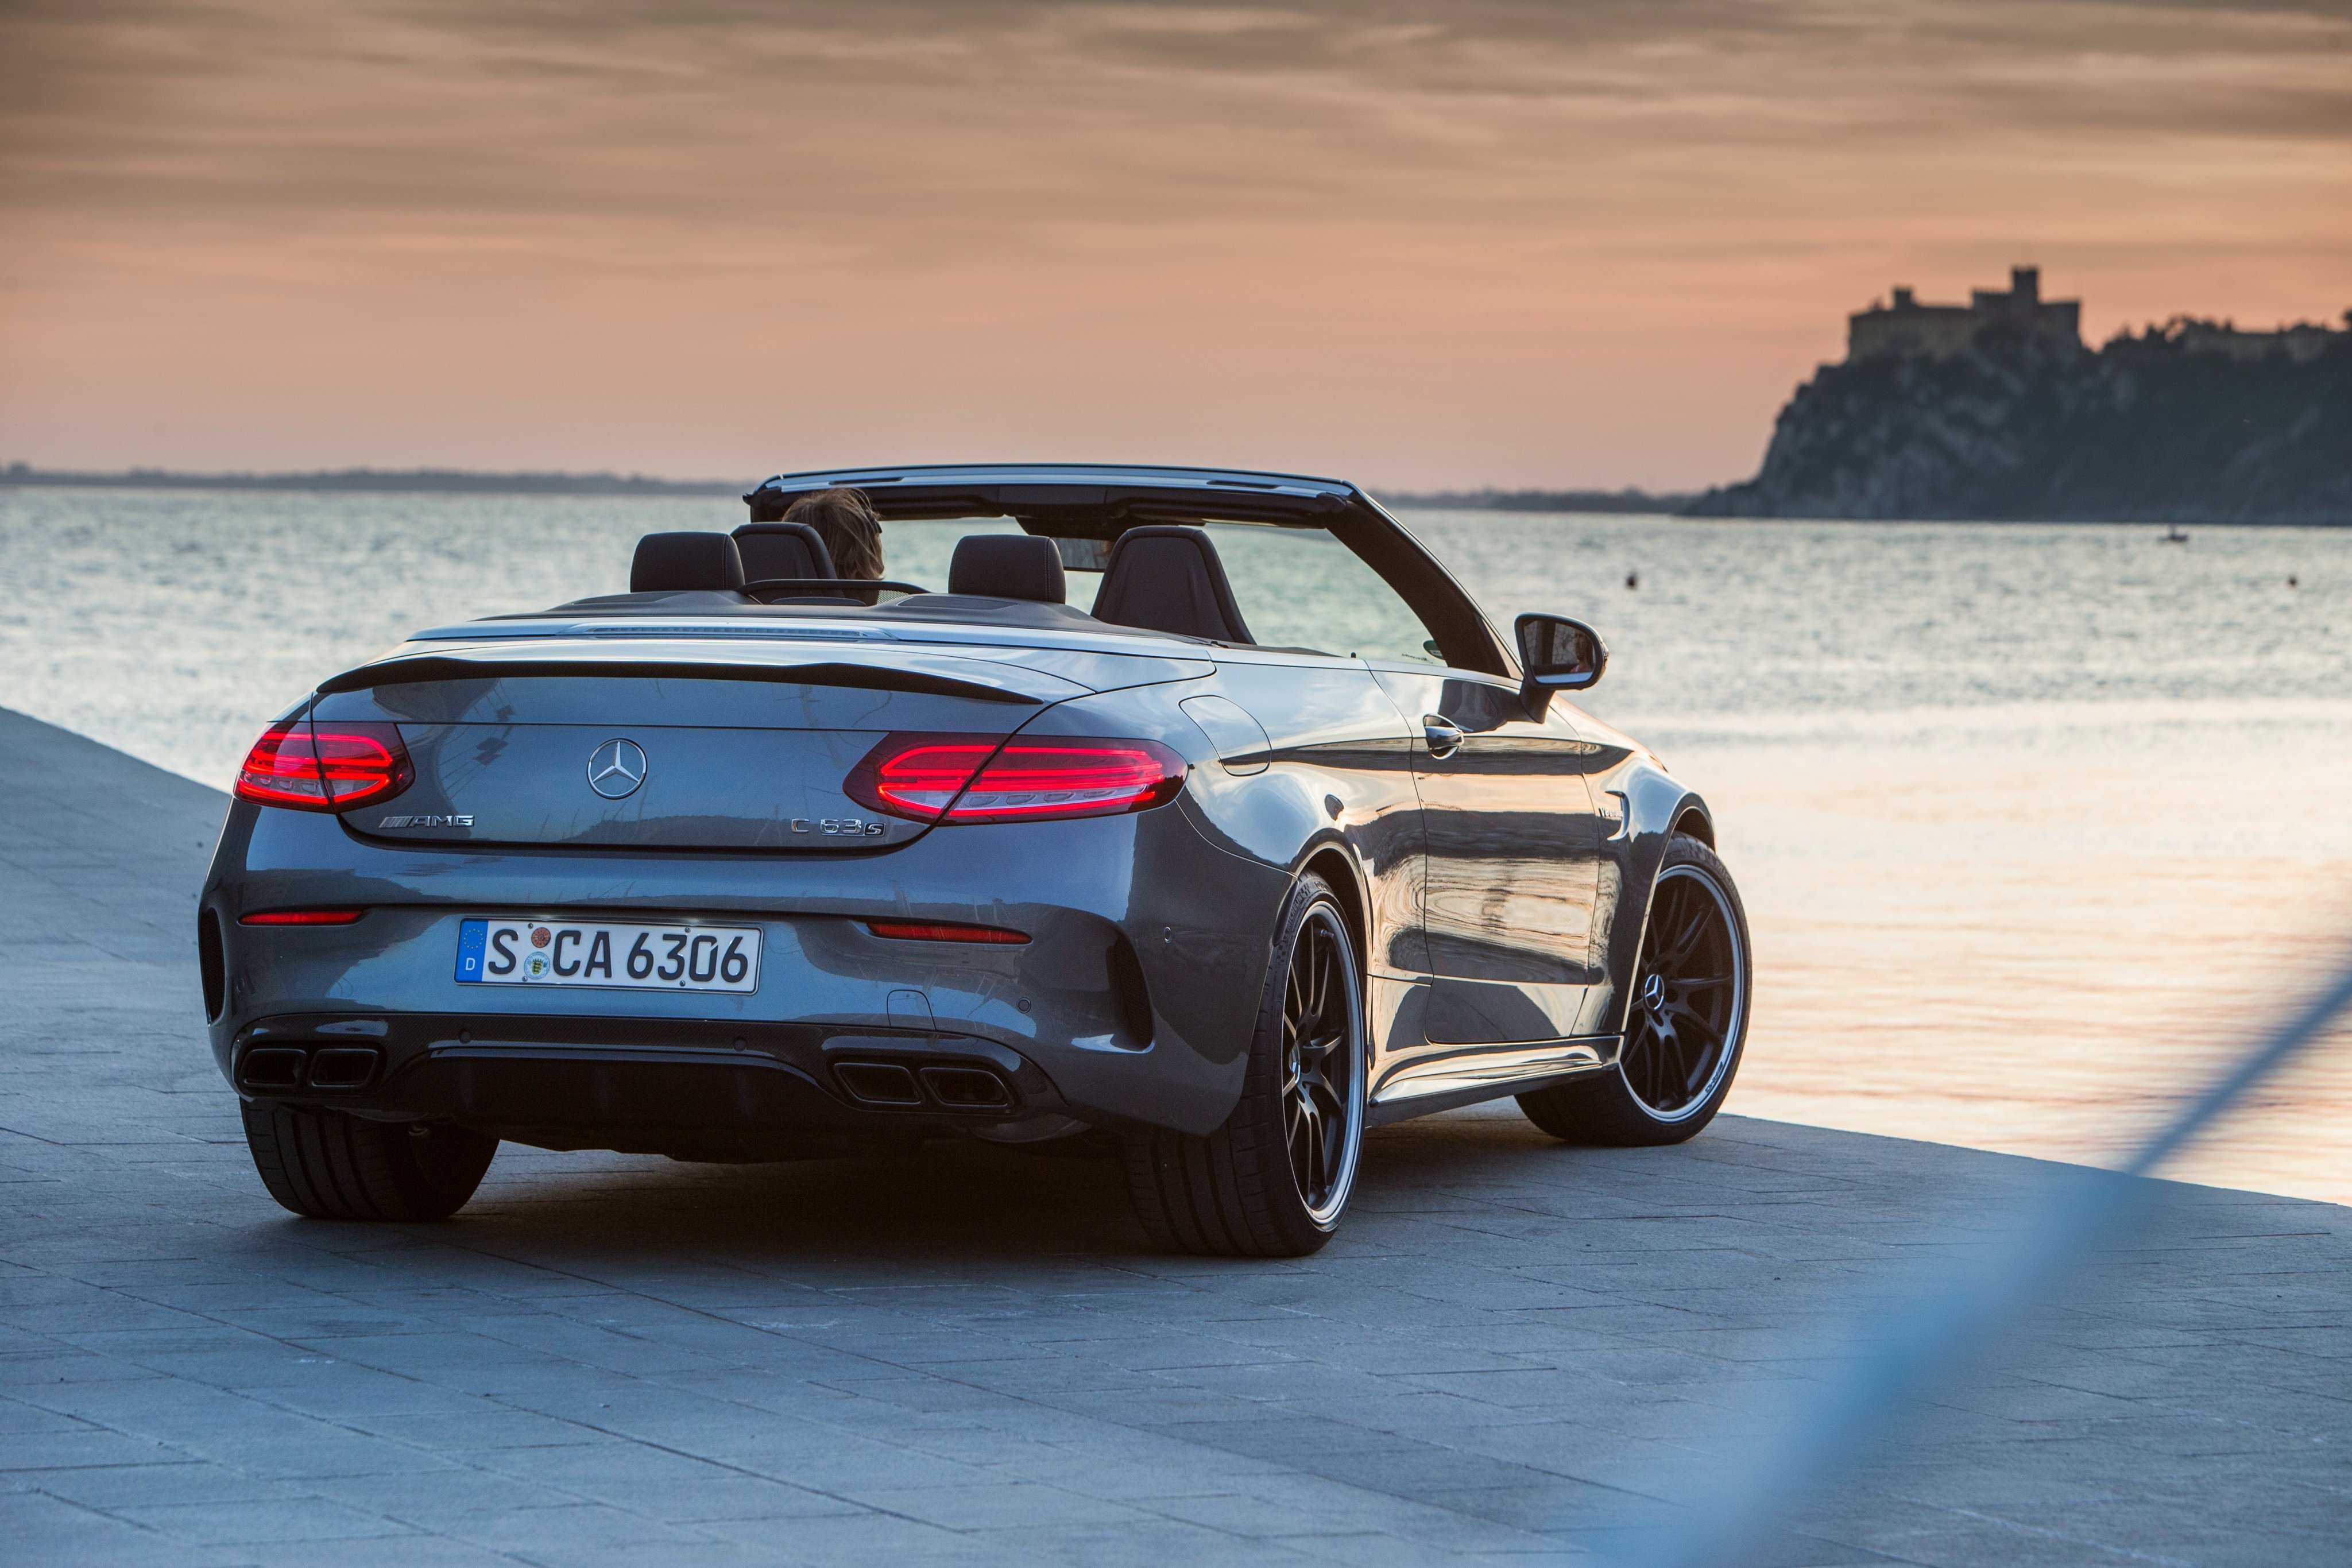 Free photo Mercedes AMG C63 S Cabriolet stands by the sea rear view